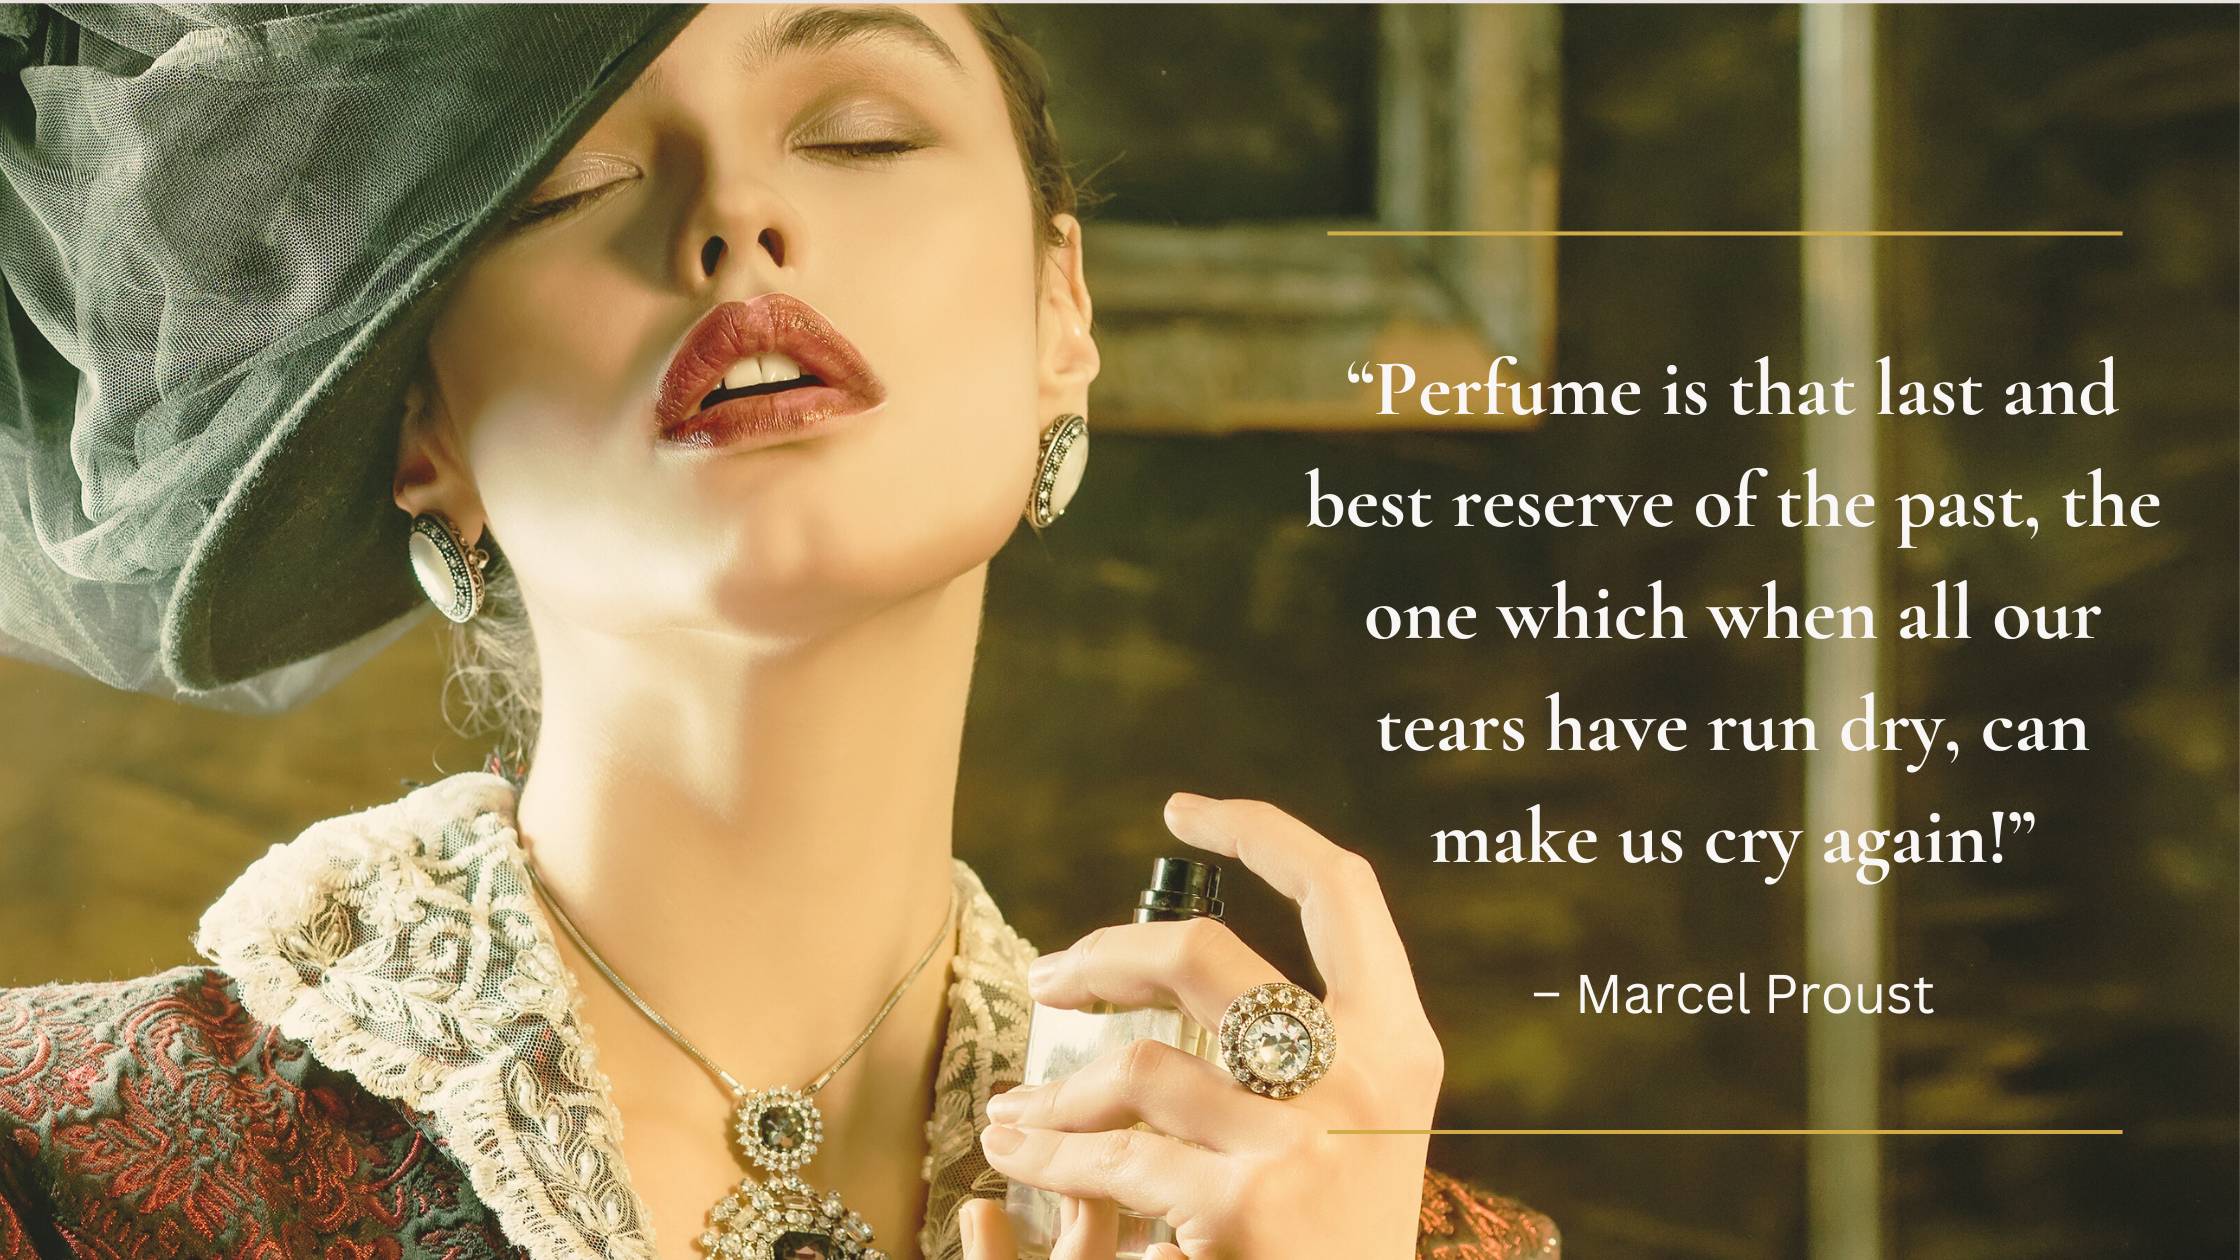 Marcel Proust Quote on Perfume